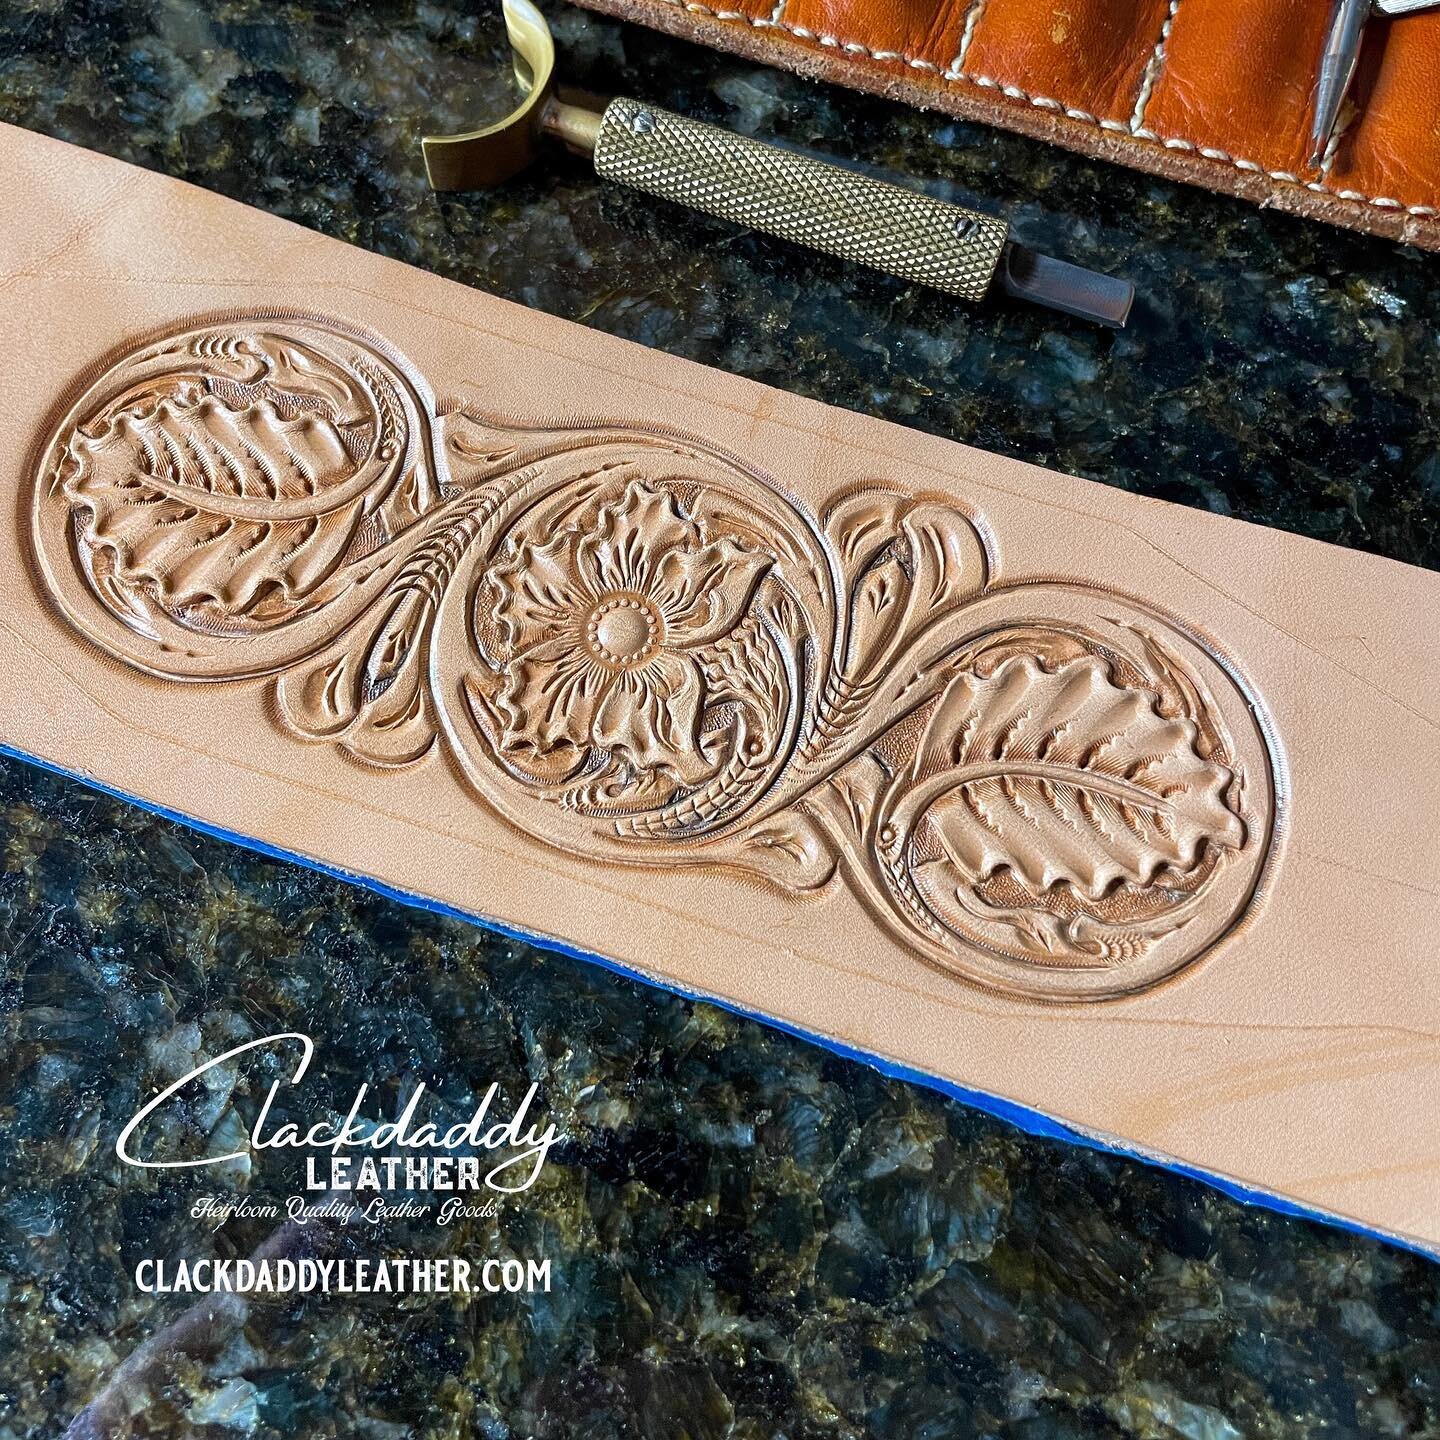 Gusset carvings are done, now time to knock out a billet. This is going to be so cool. #customleather #leathercarving #sheridanstyle #leatherwork #westernstyle #leatherbag #bagdesign #smtx #satx